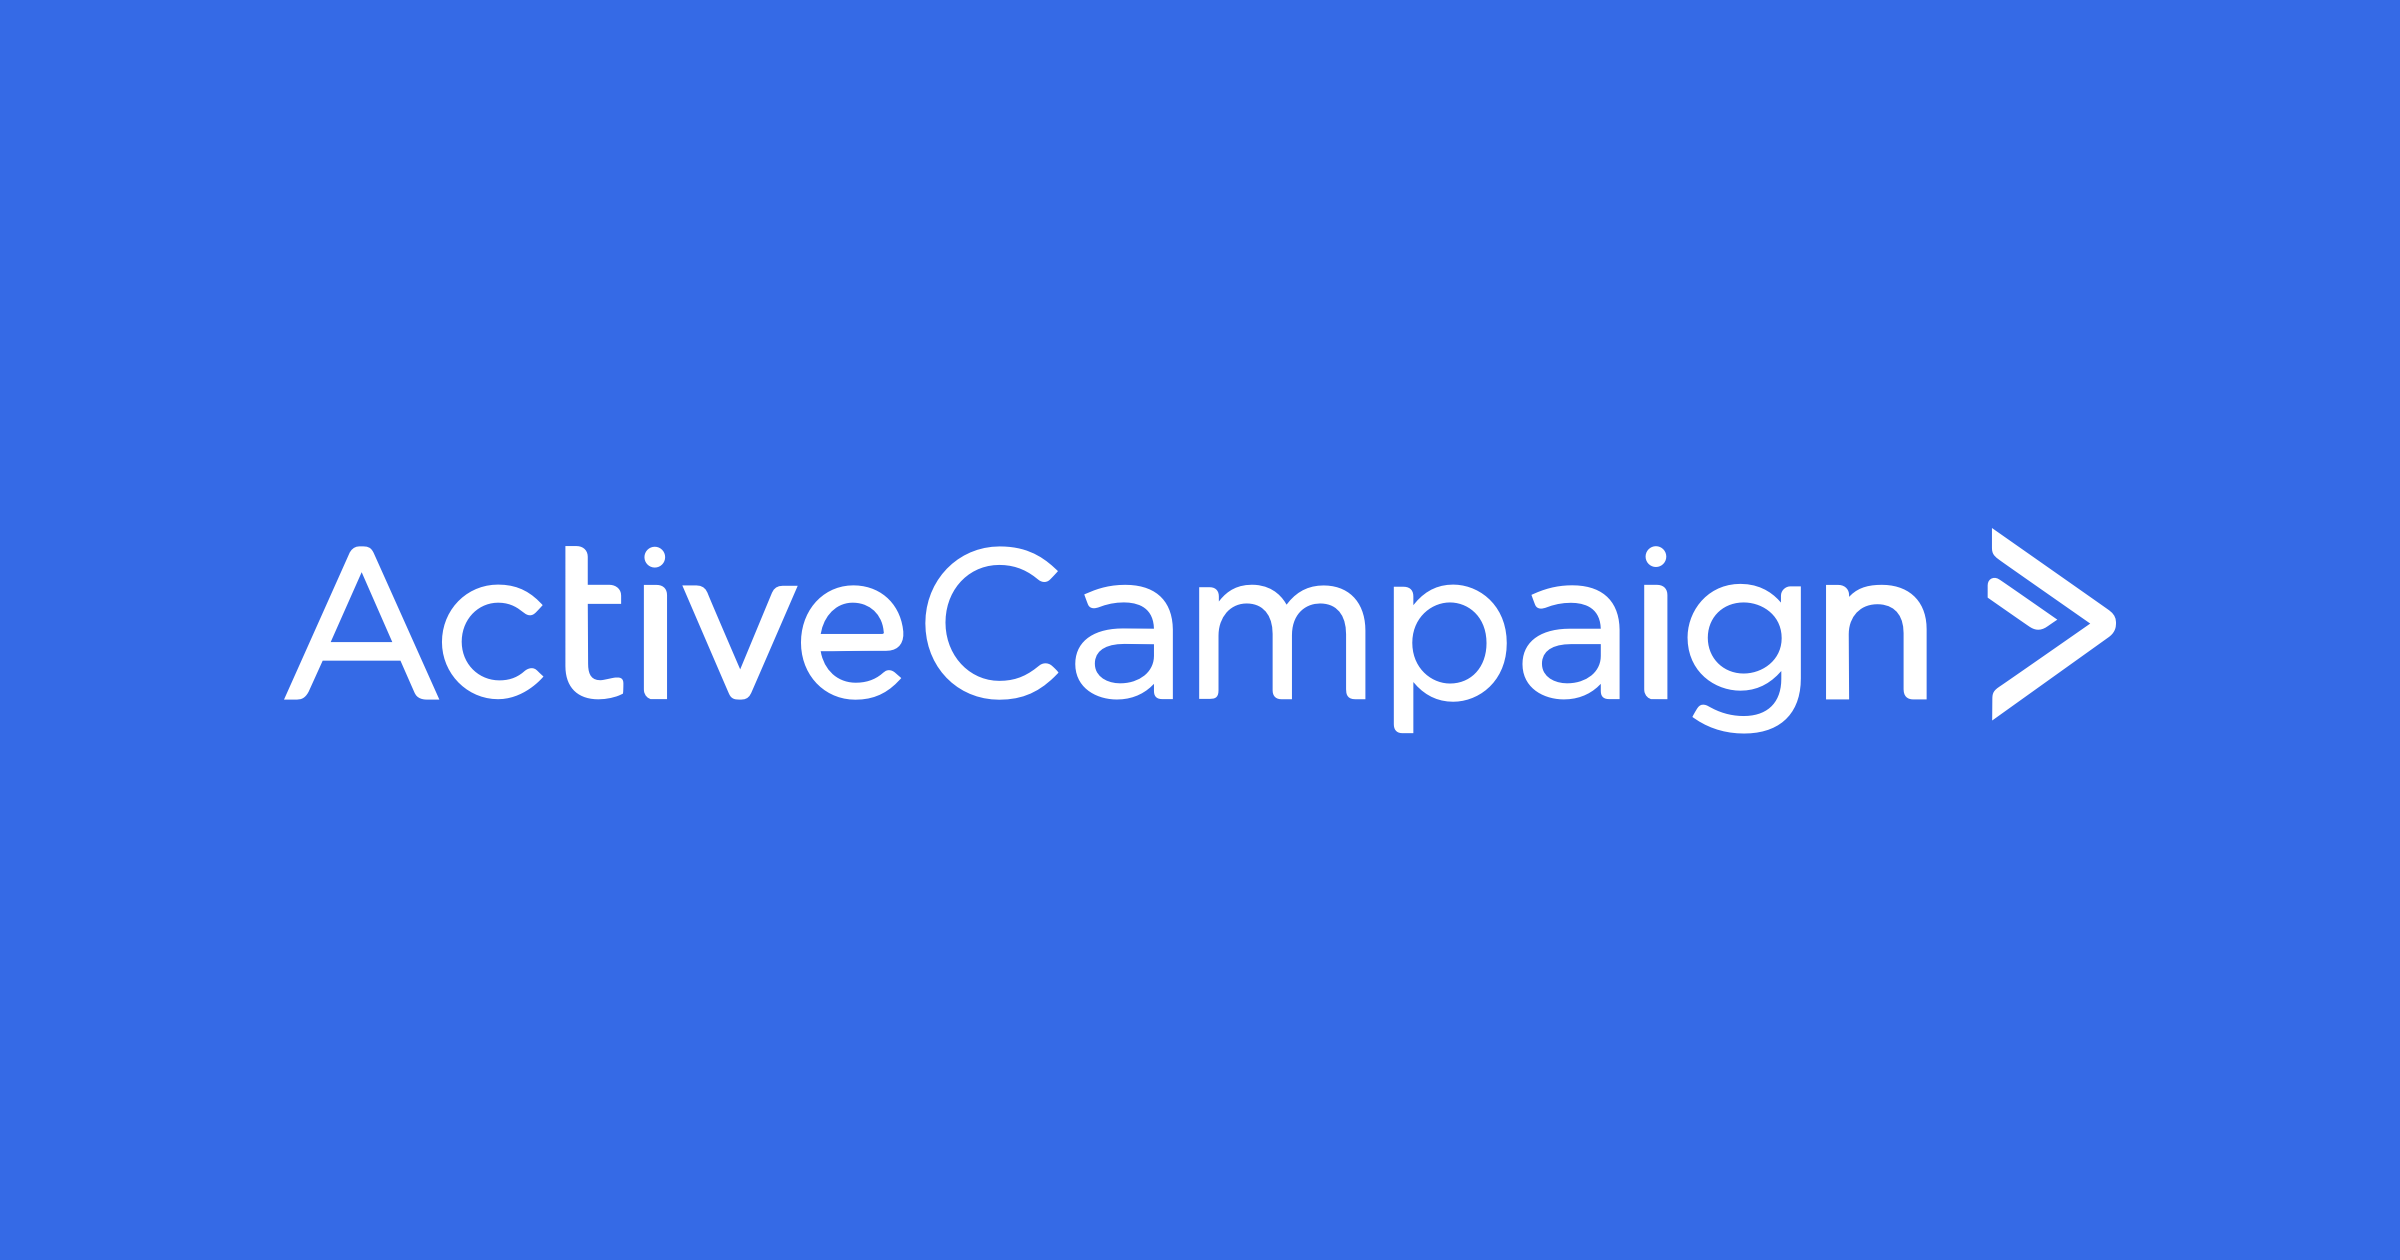 All-in-one Marketing Platforms: ActiveCampaign